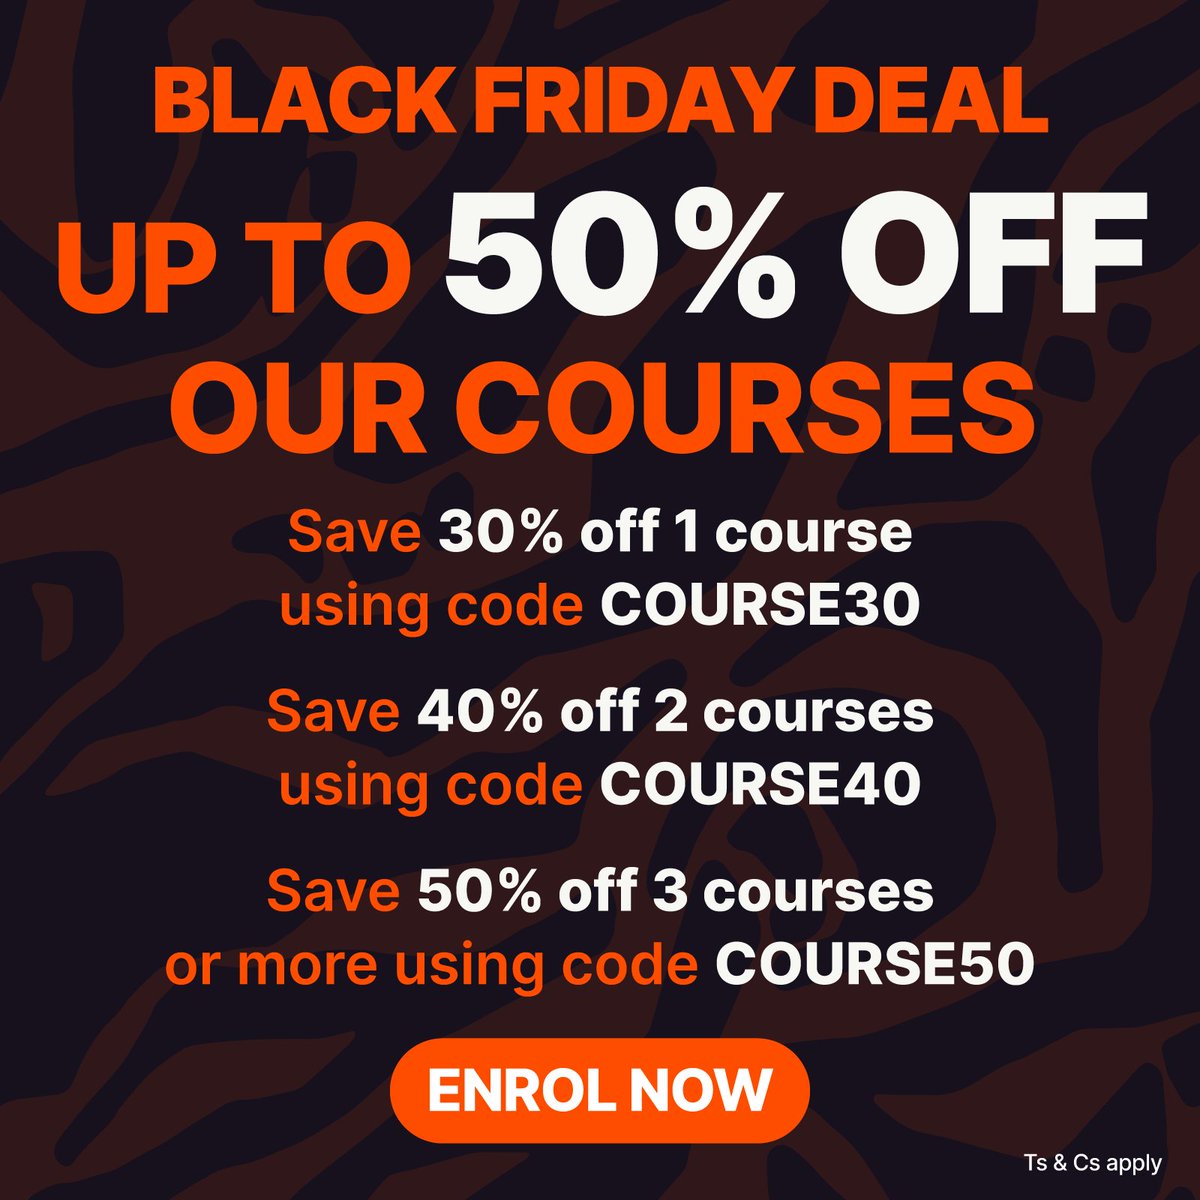 🎓Get Up To 50% OFF Our Courses At Oxbridge Today! OFFER ENDS MIDNIGHT! t.ly/Lece9